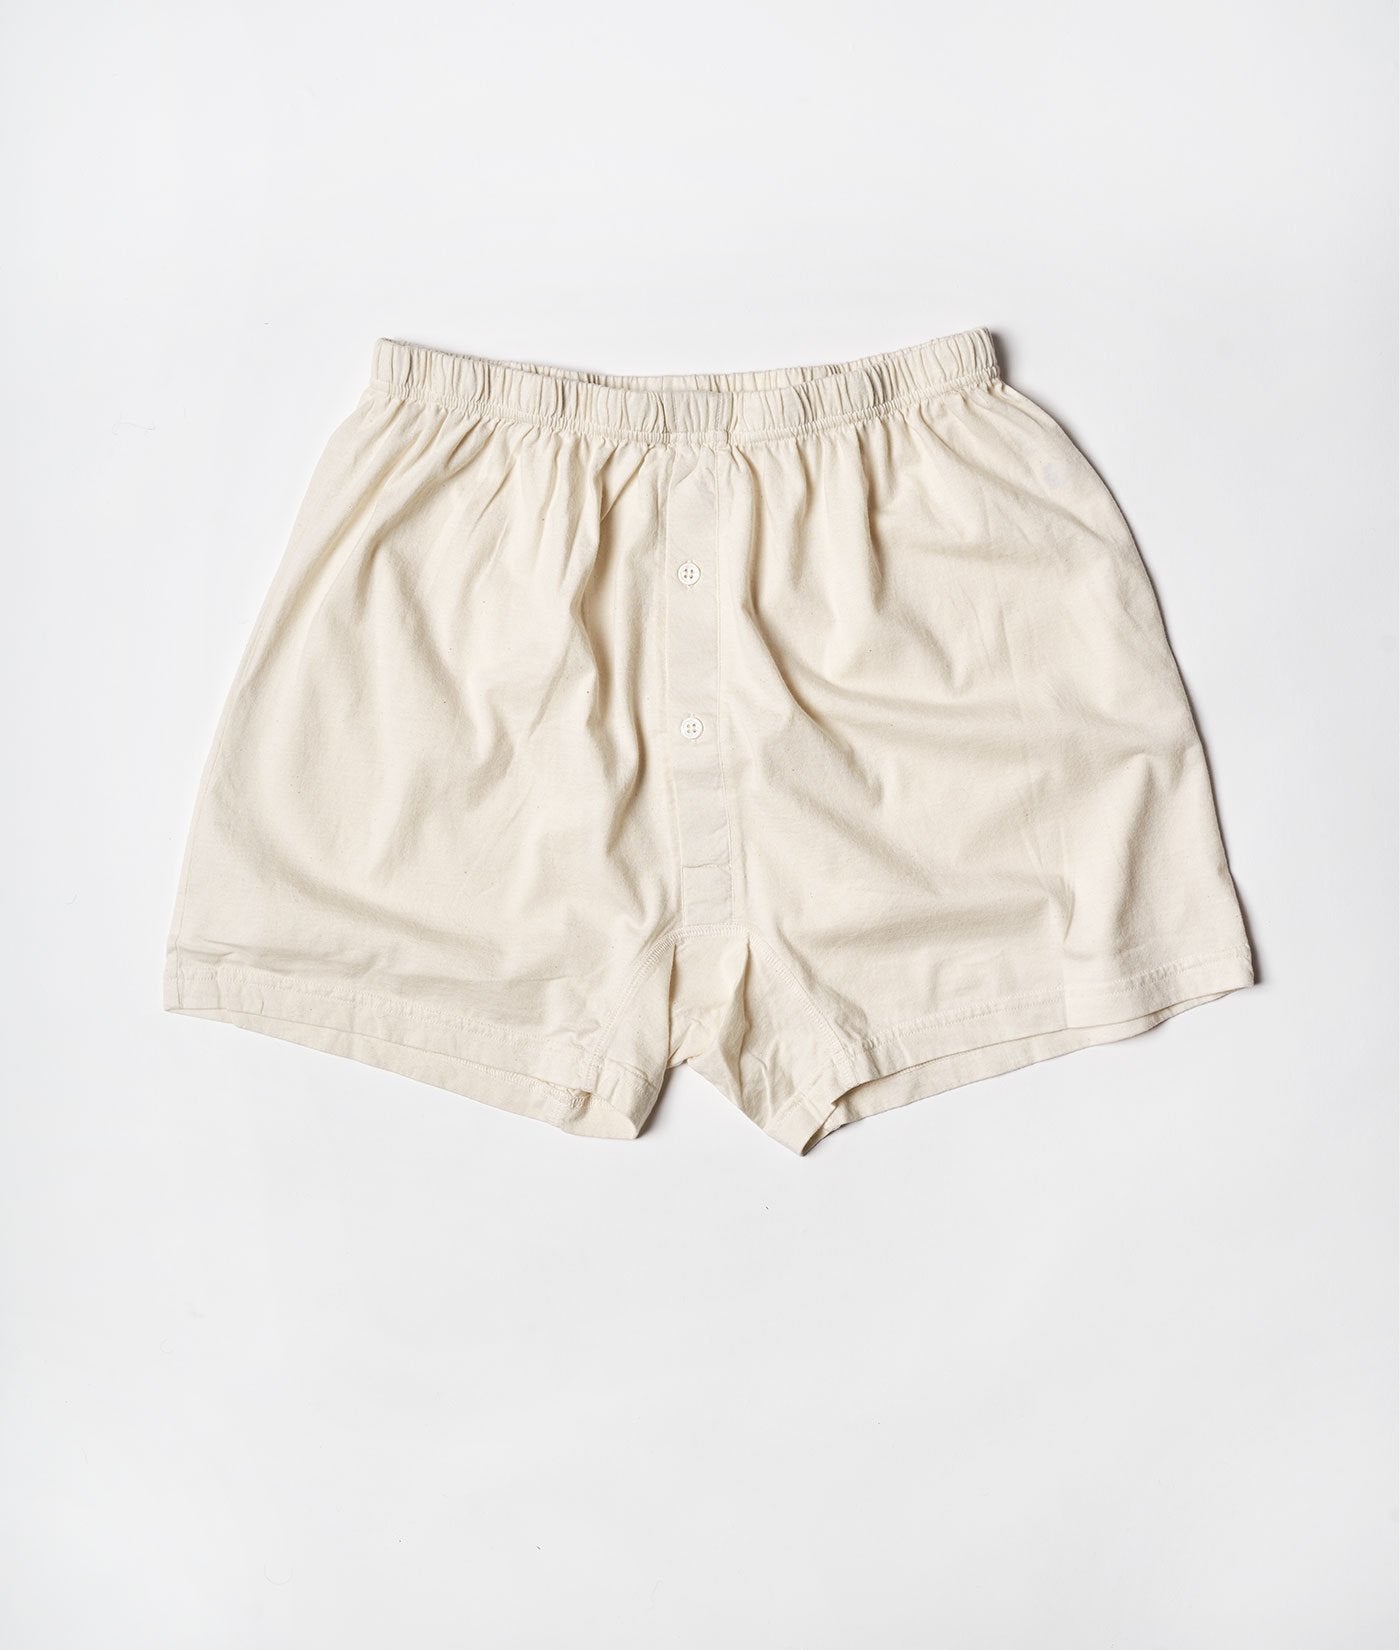 Industry of All Nations Jersey Boxers, Undyed